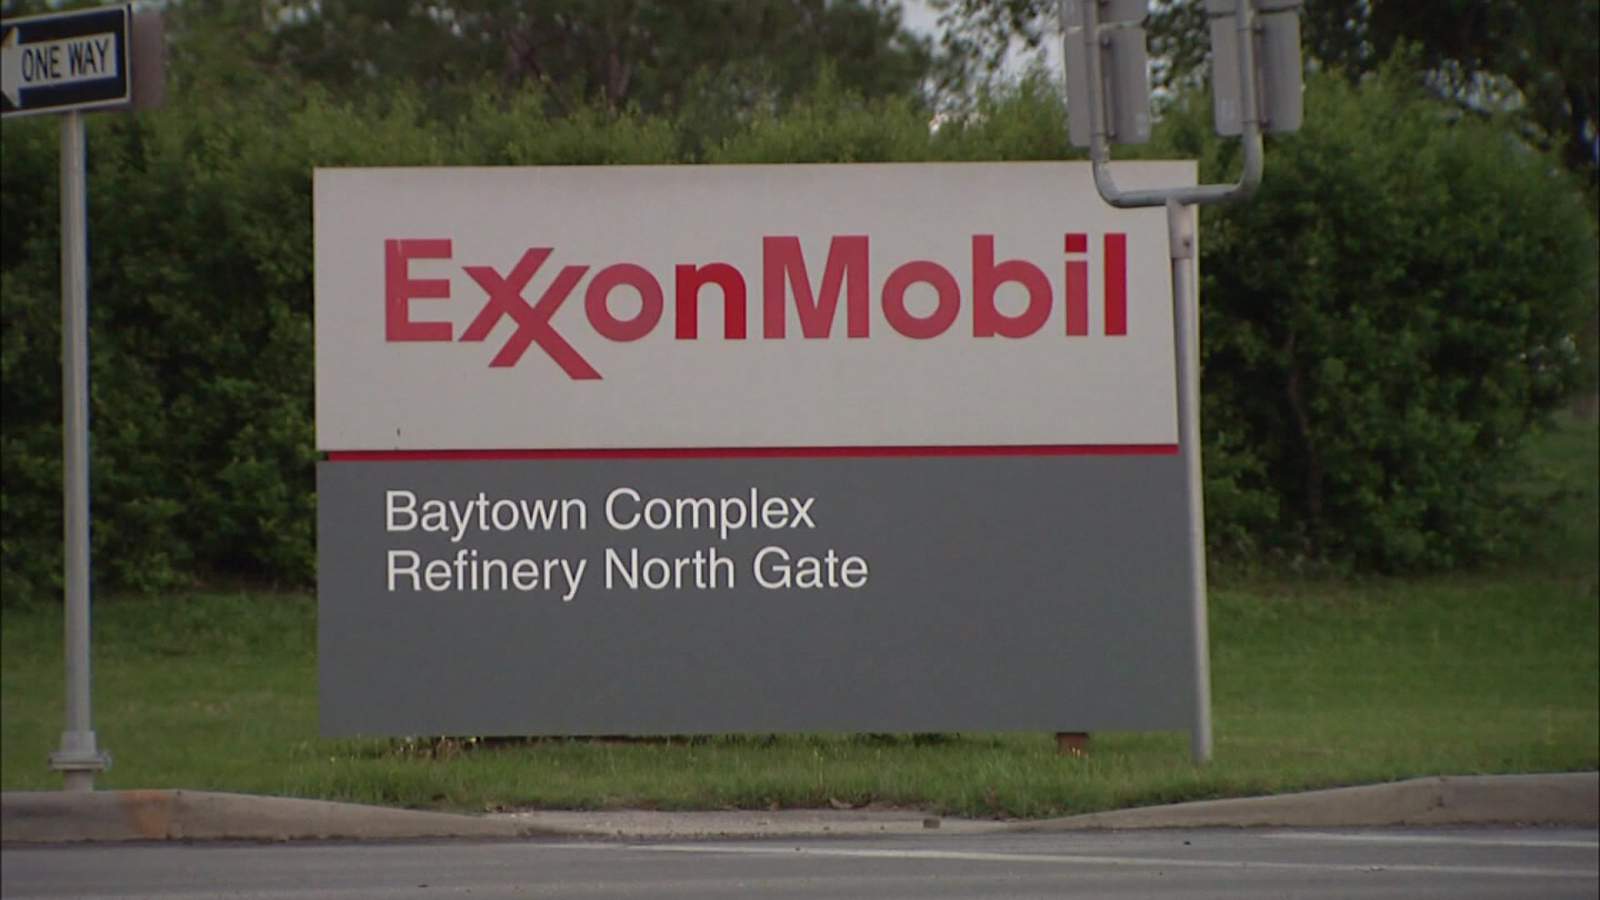 Contractor dies after being injured at ExxonMobil facility in Baytown